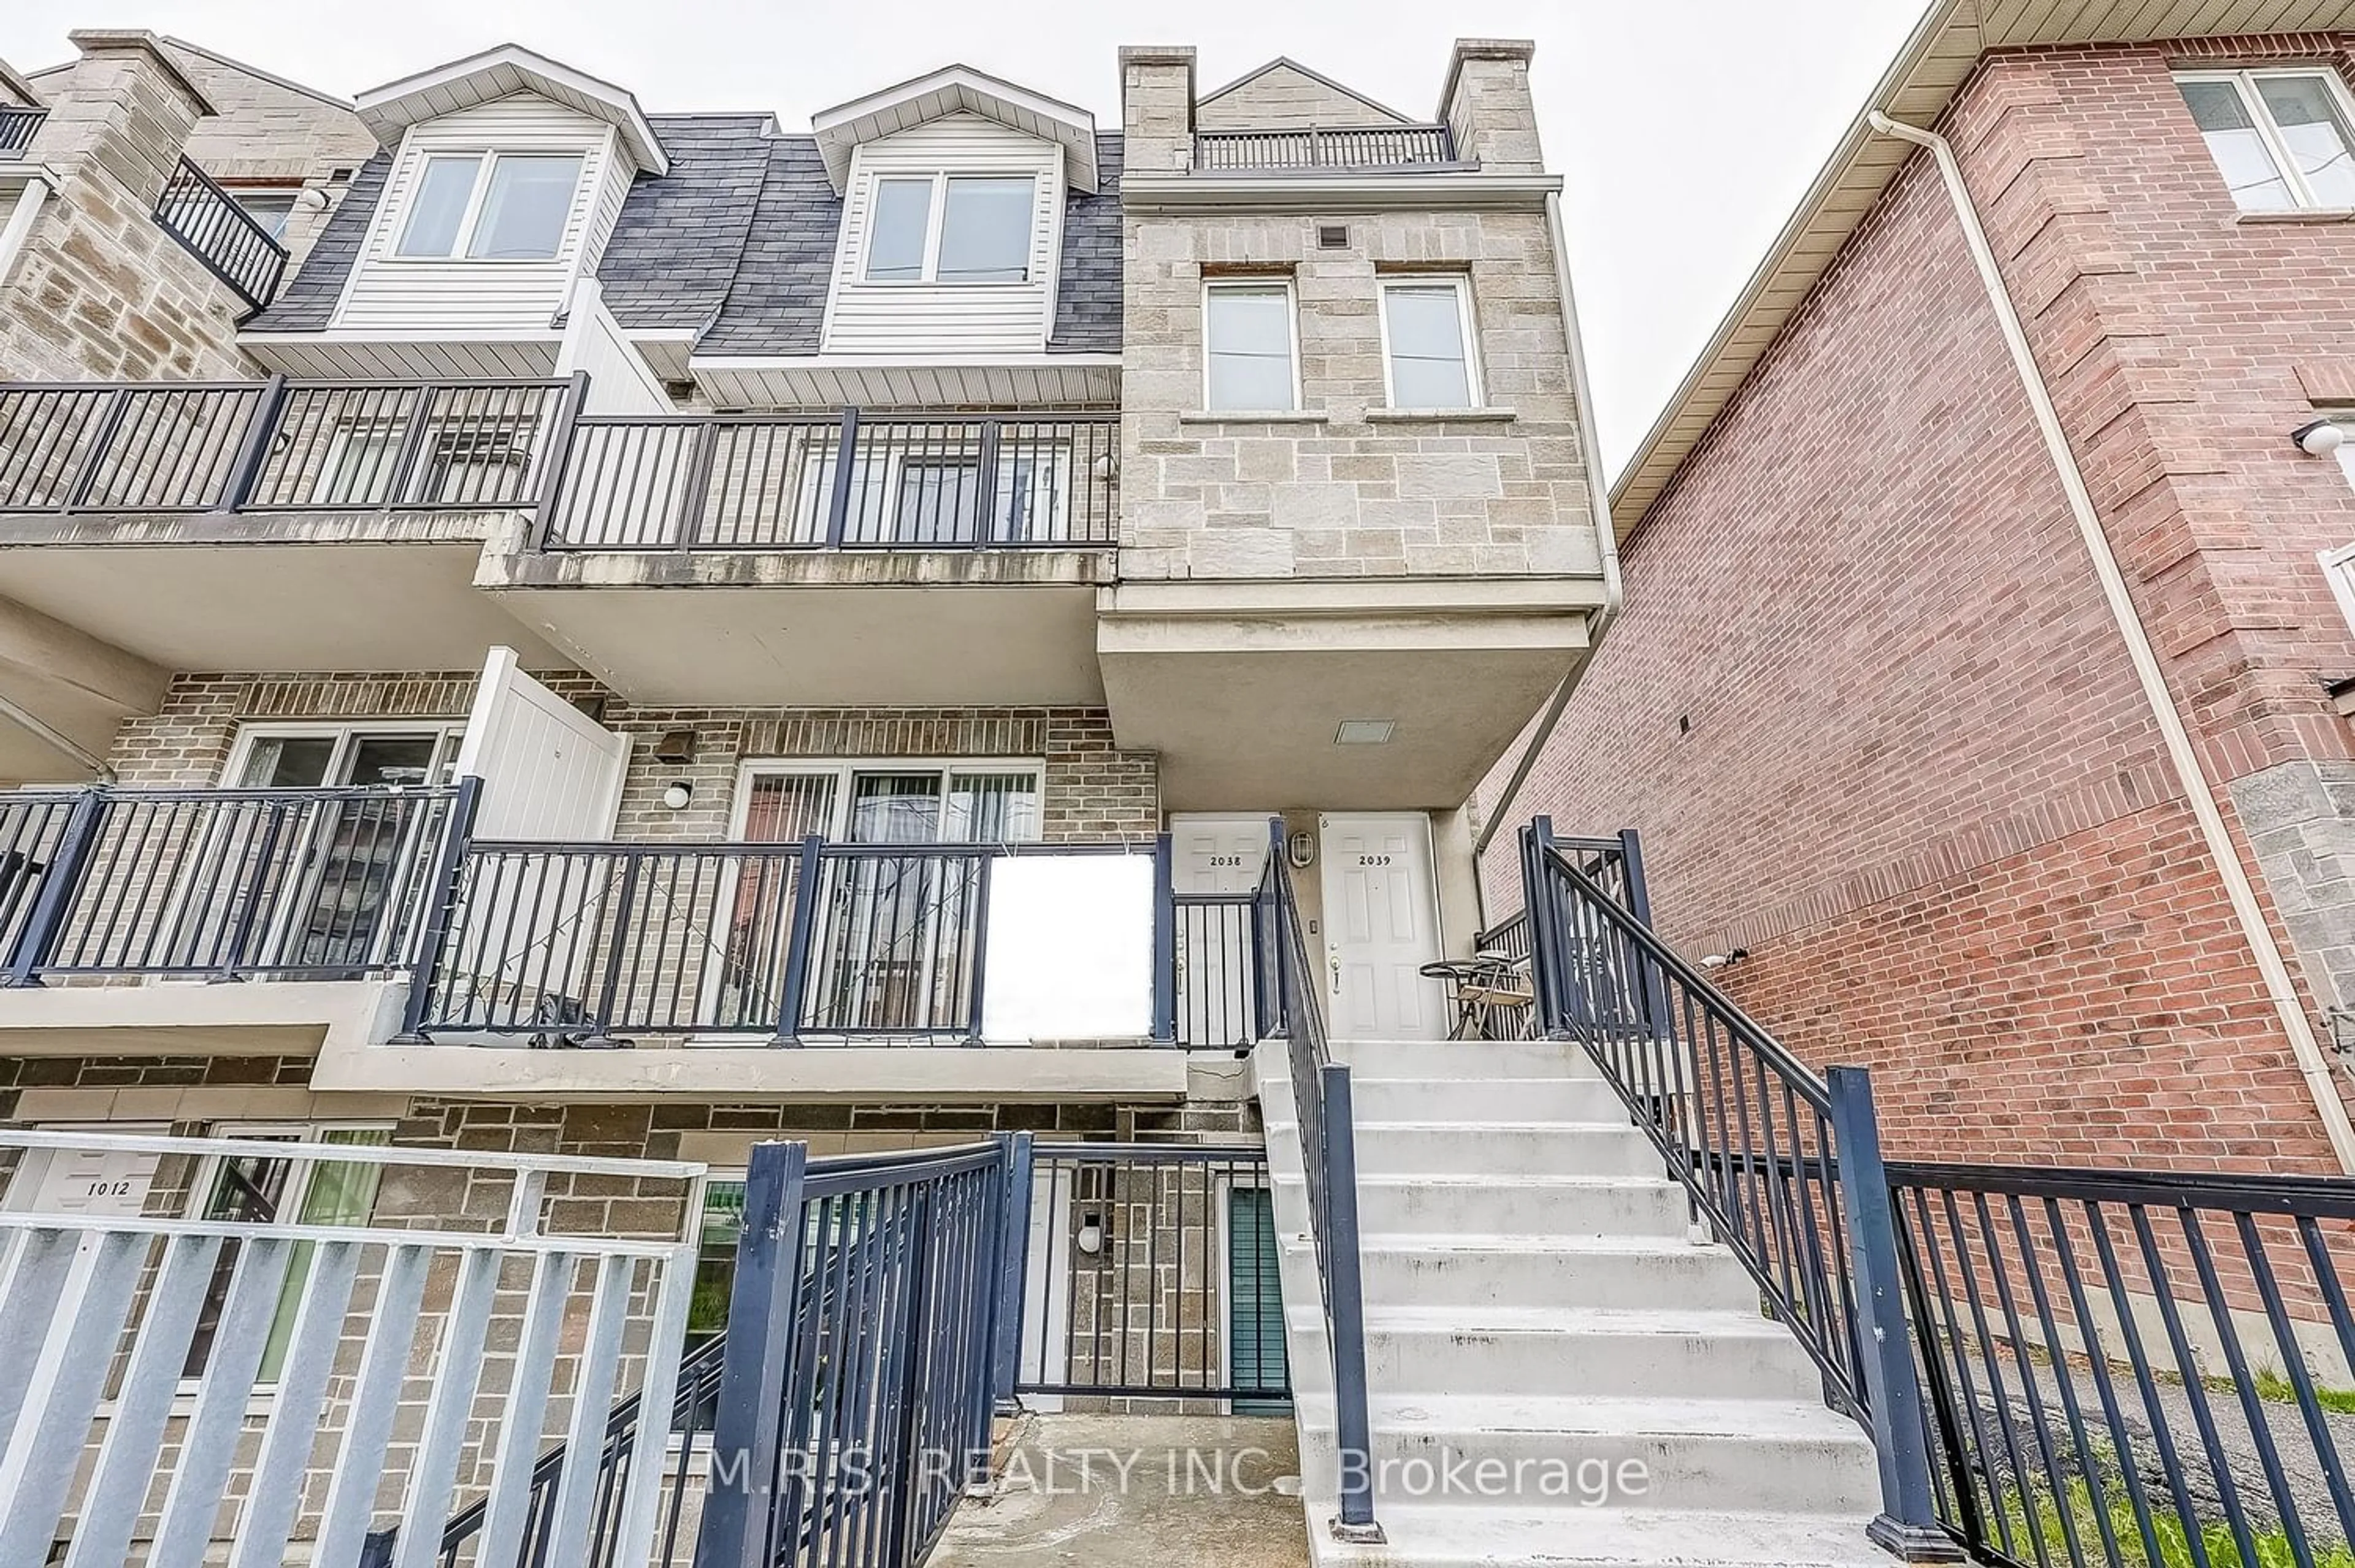 A pic from exterior of the house or condo for 3025 Finch Ave #2038, Toronto Ontario M9M 0A2